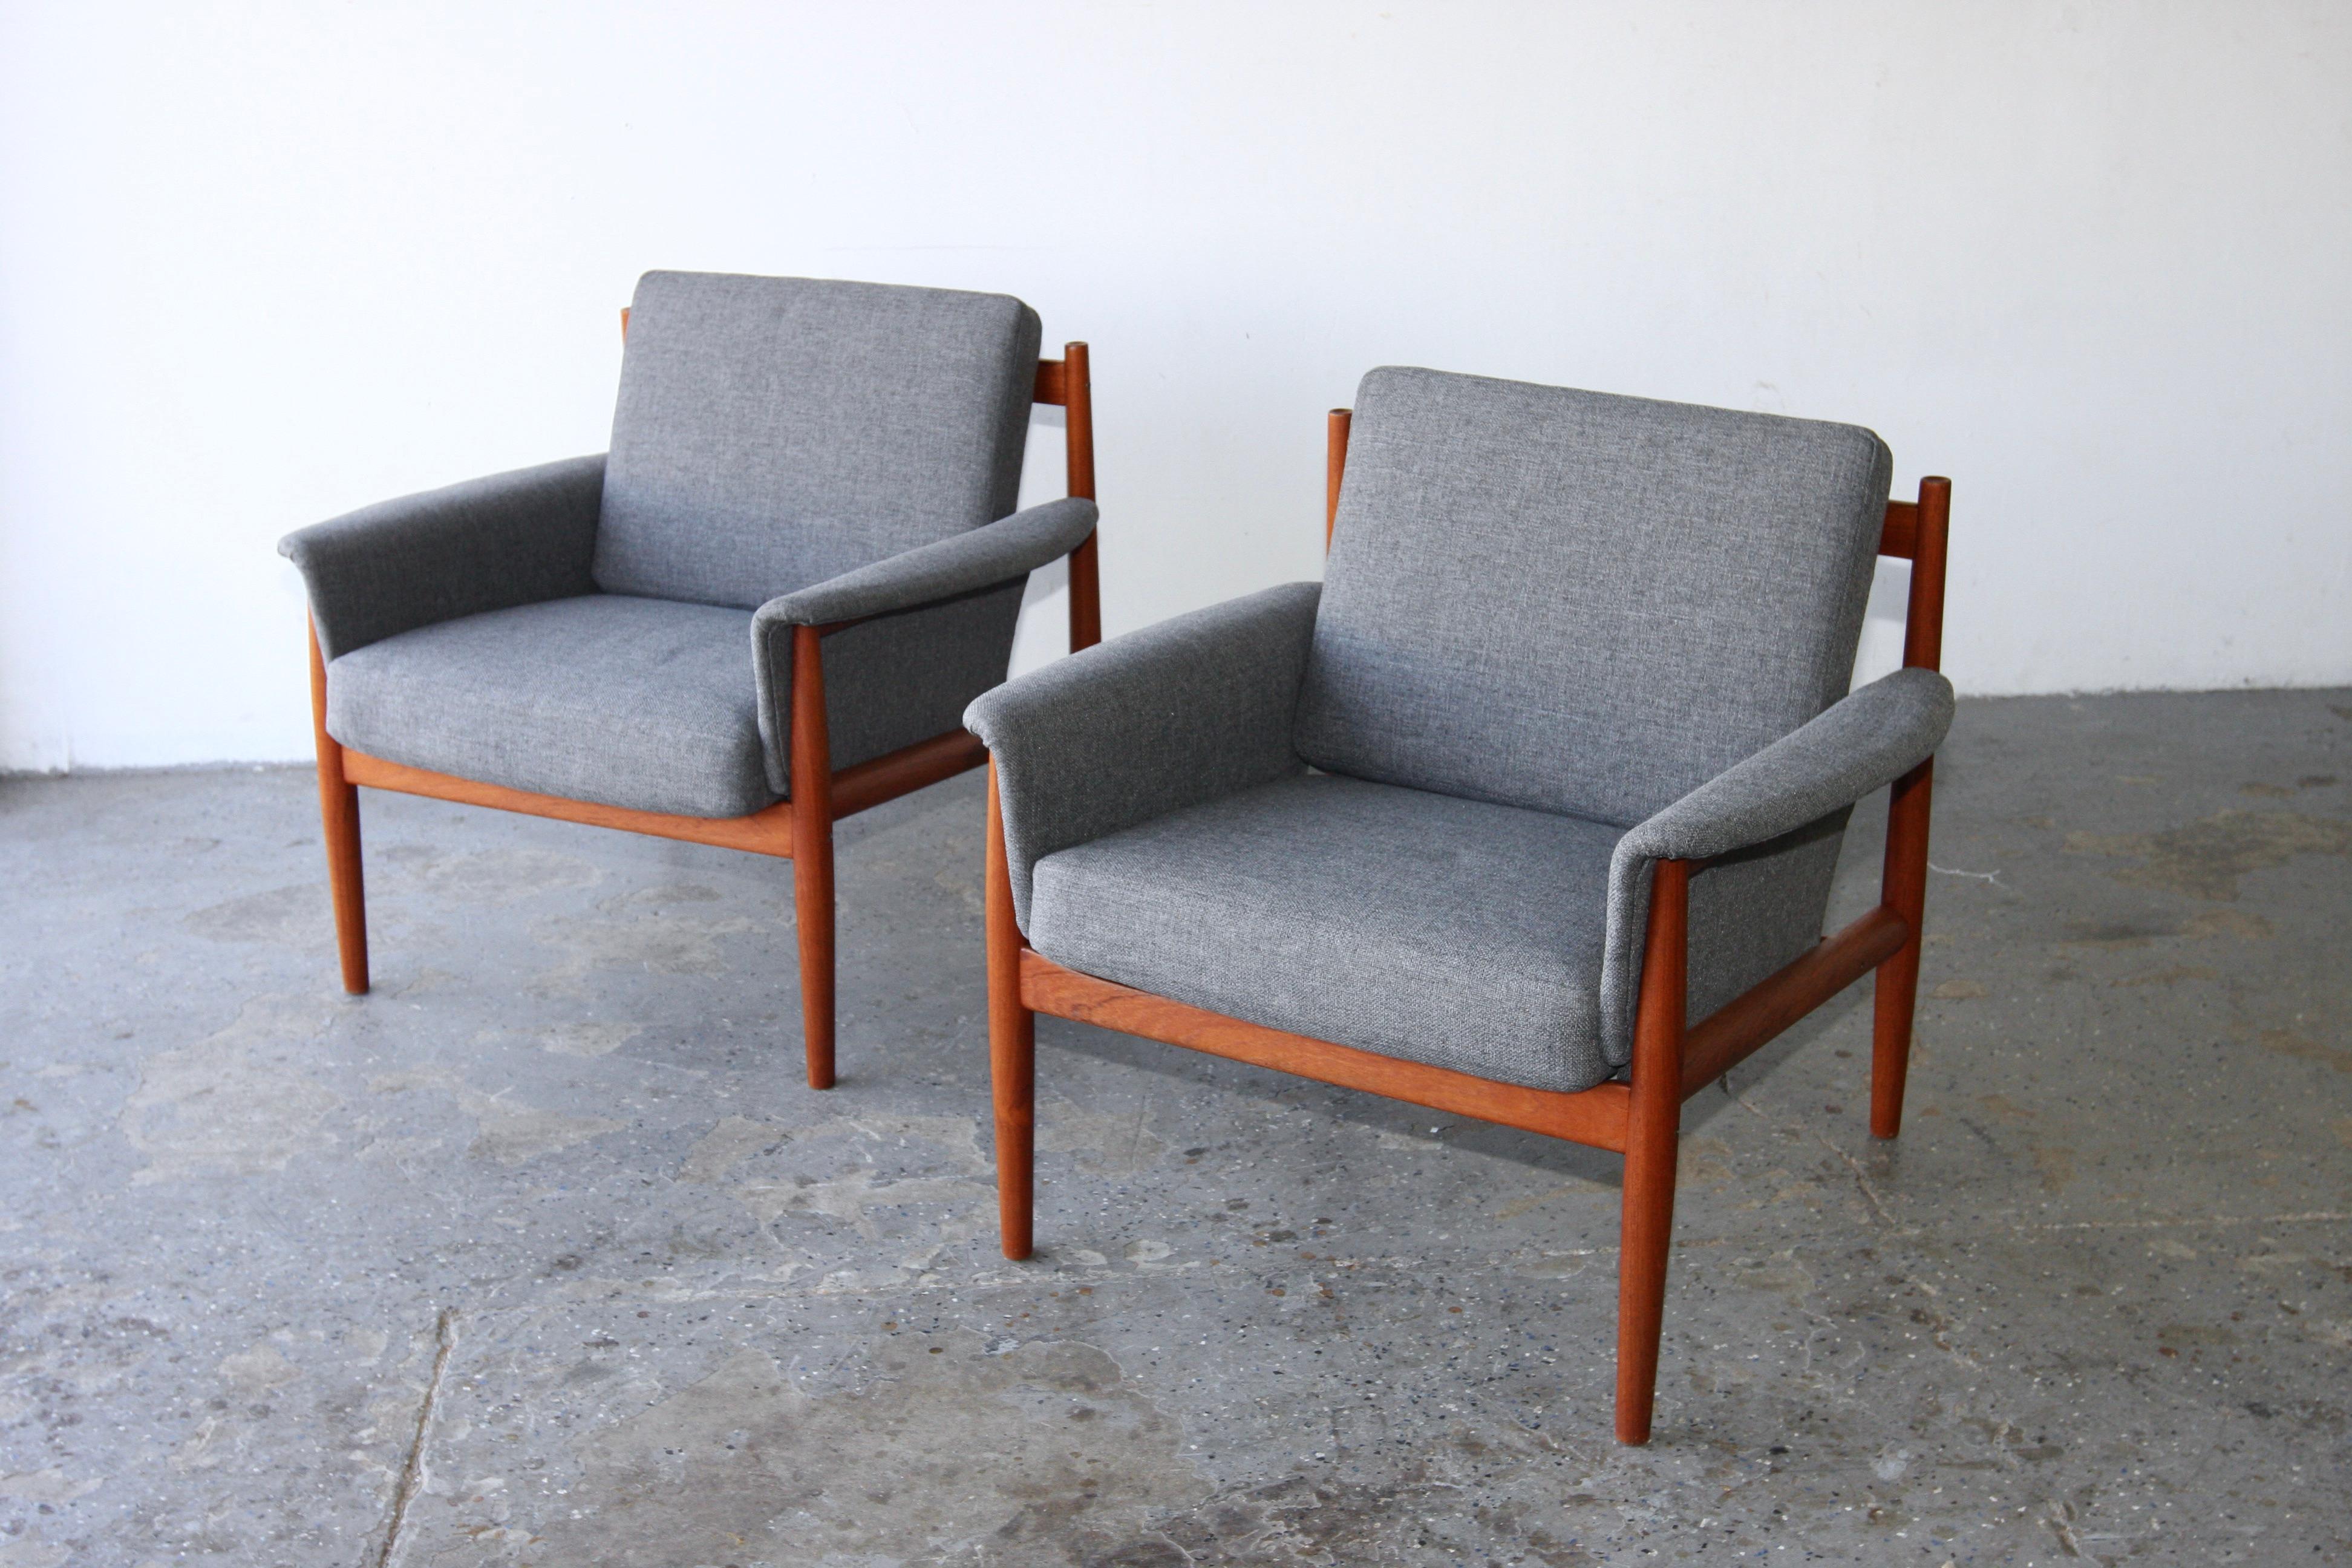 Stunning vintage Danish modern lounge chair in teak by Grete Jalk. Designed in 1962 for France and Sons. Chair features upholstered sides which curve to cradle the seat and rest on armrests. Sinuous back rest and gorgeous details like the indented